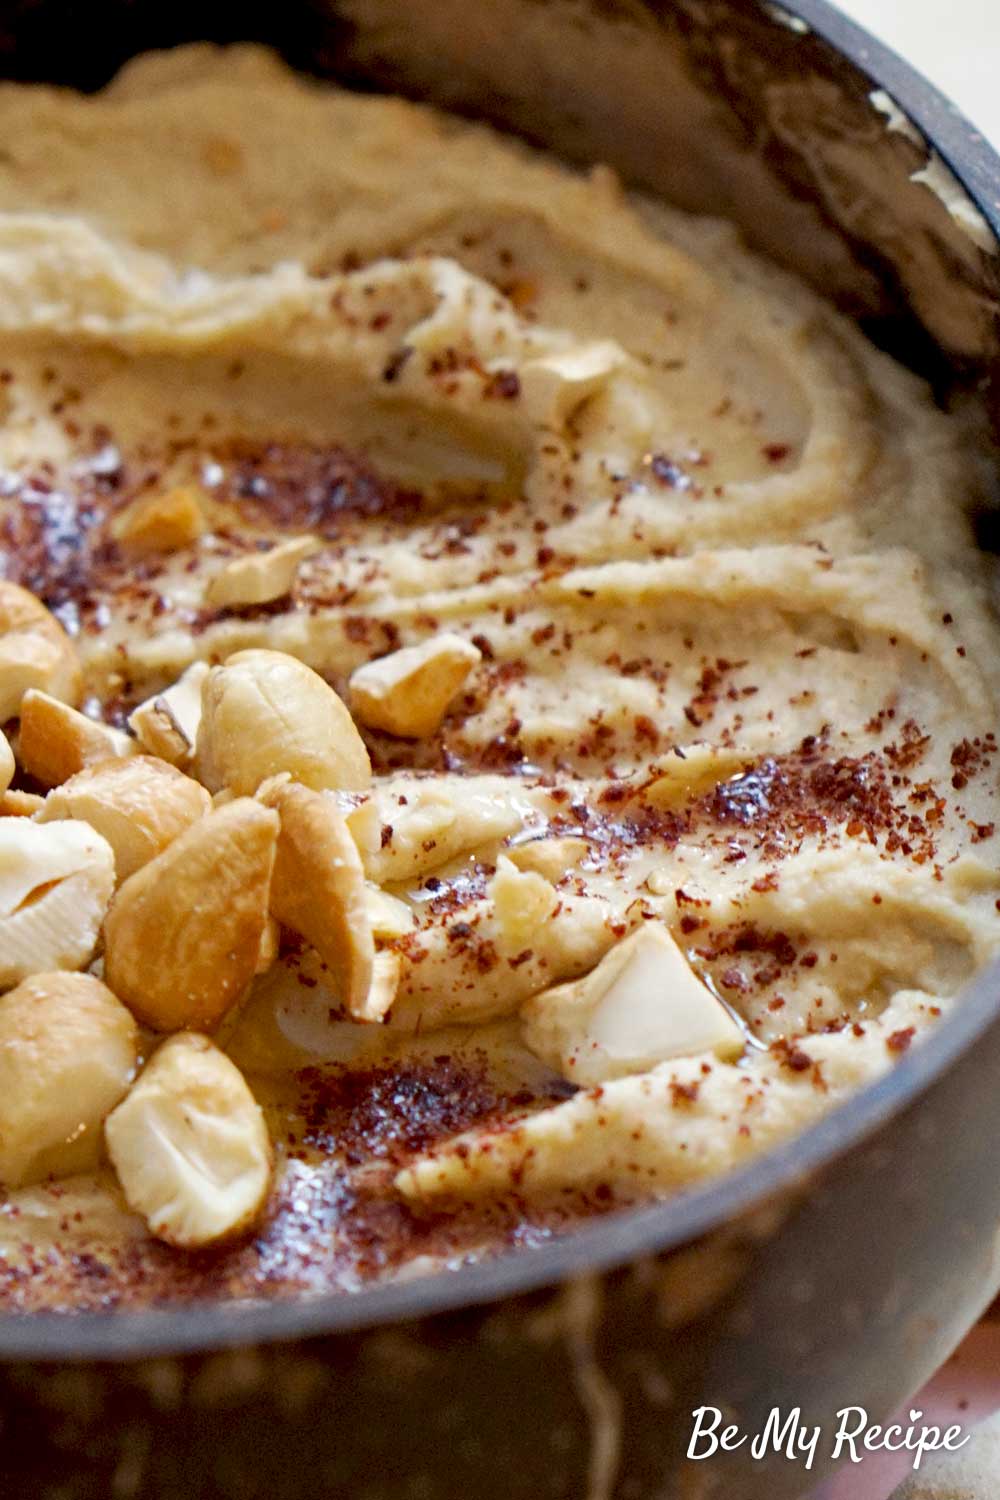 Easy Hummus Recipe that Ensures You’ll Never Have Store-bought Again